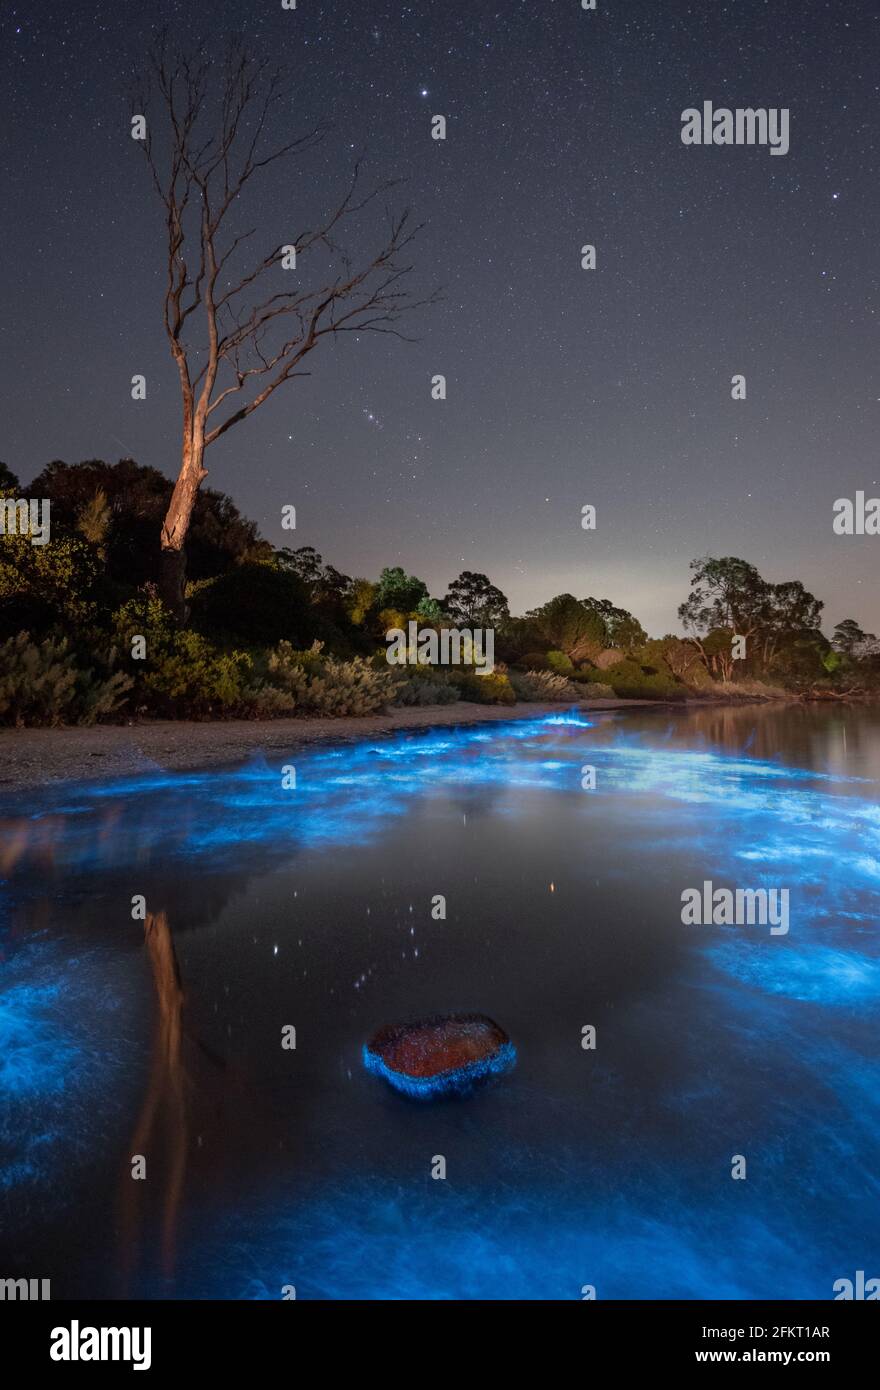 Orion reflected in blue bioluminescence Stock Photo